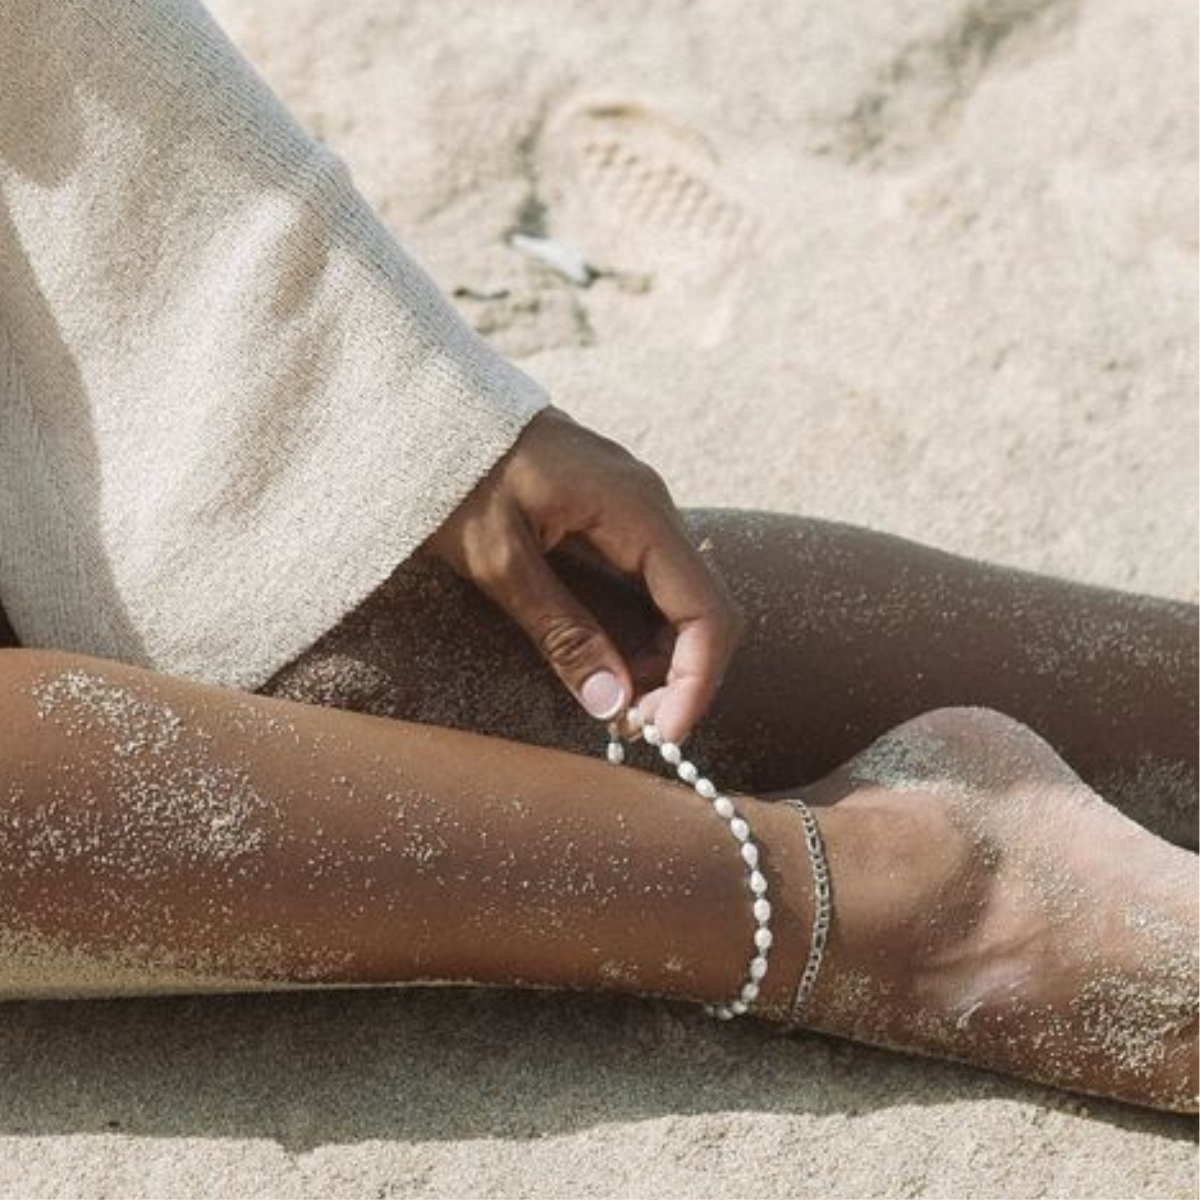 The Understated Sexiness of the Anklet